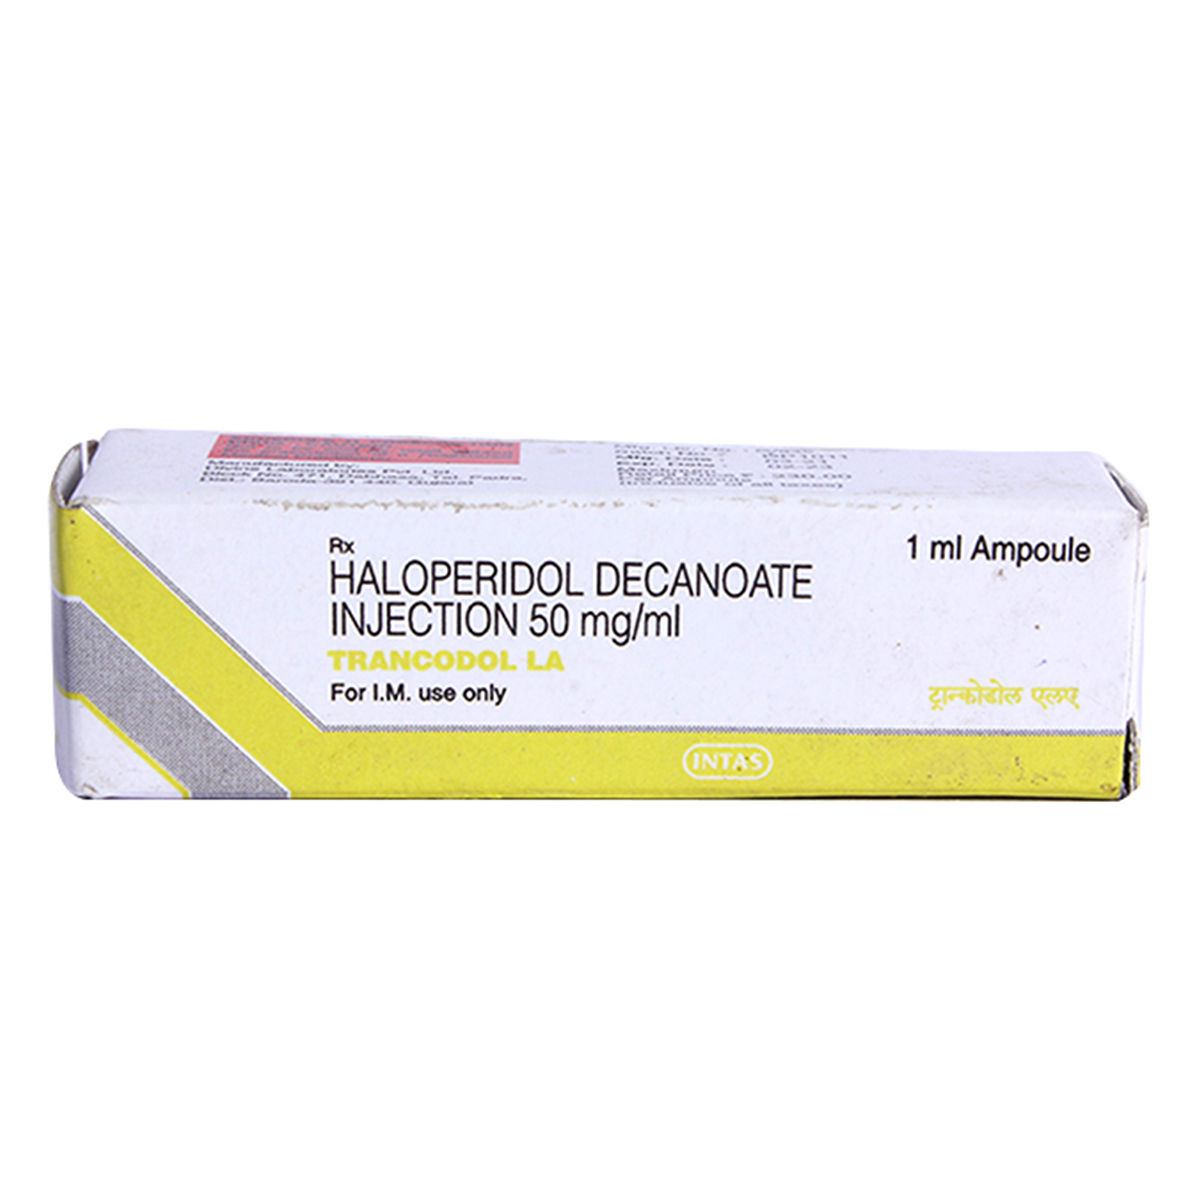 Serenace Injection 1ml: View Uses, Side Effects, Price and Substitutes